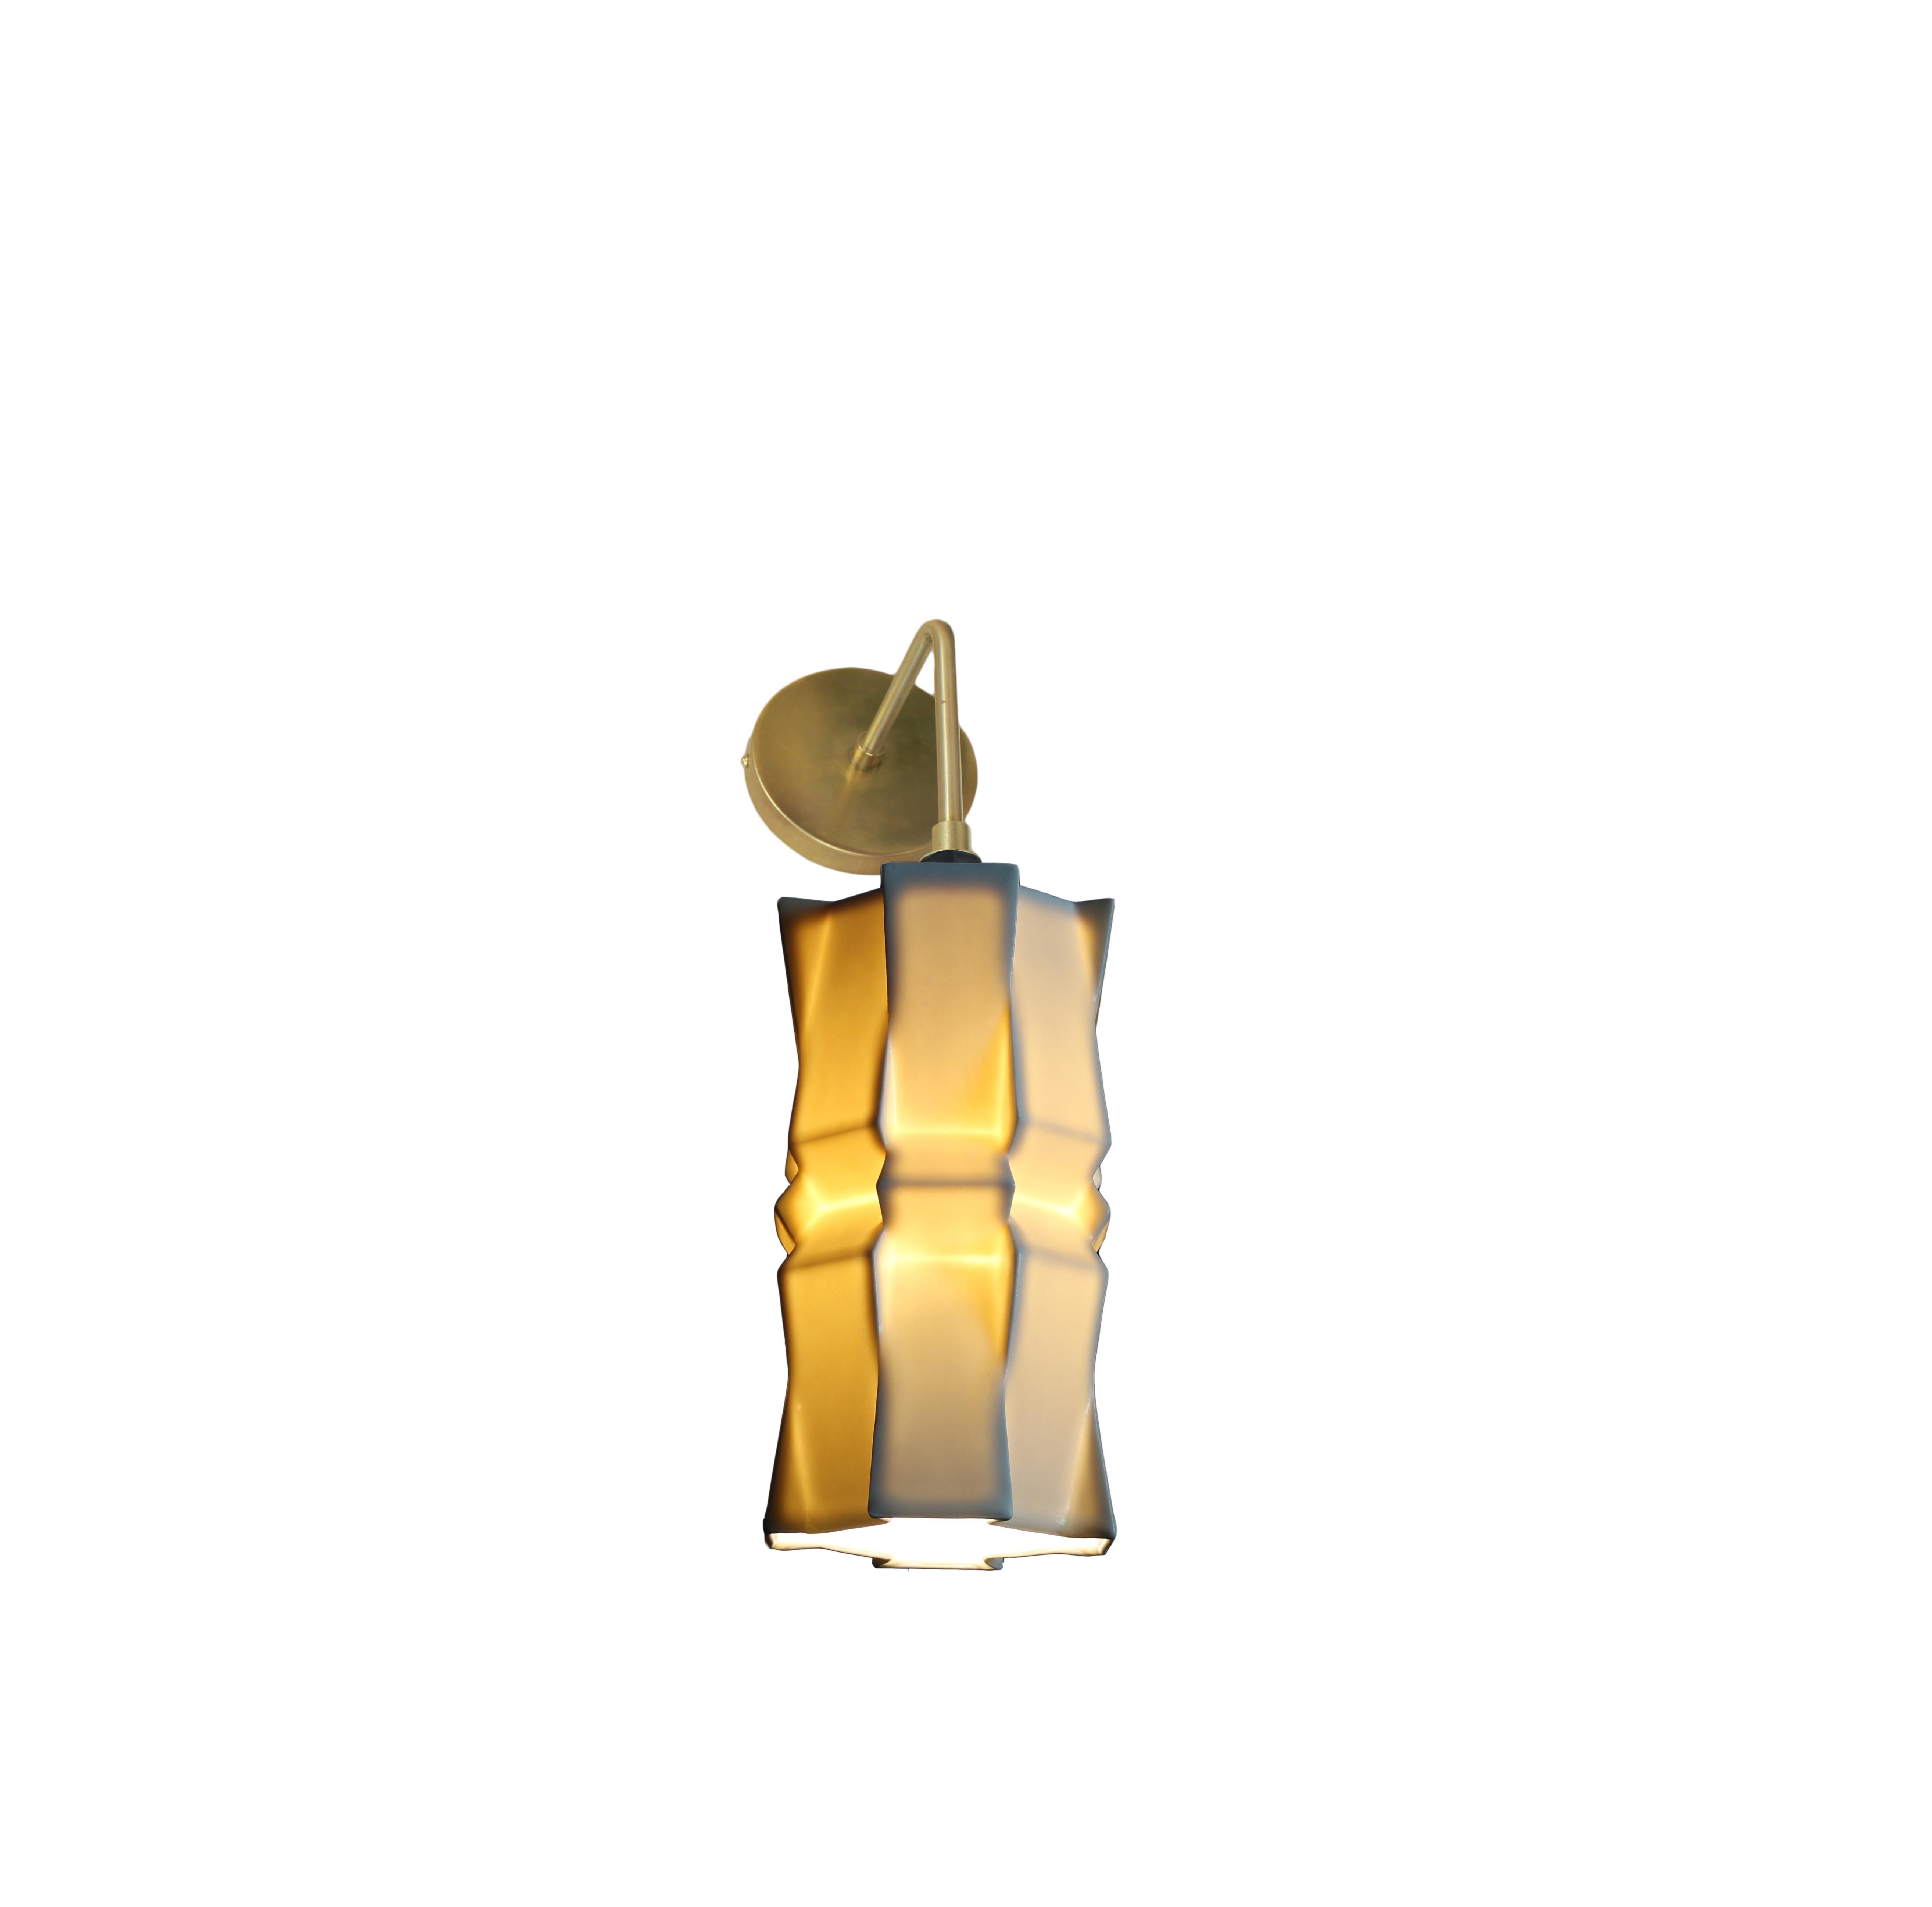 9 inch porcelain wall sconce the most intricate of the Tessellation collection, this porcelain wall sconce emits a soft, elegant glow through a striking geometric porcelain shade, shining direct downward or upward light through the open base. With